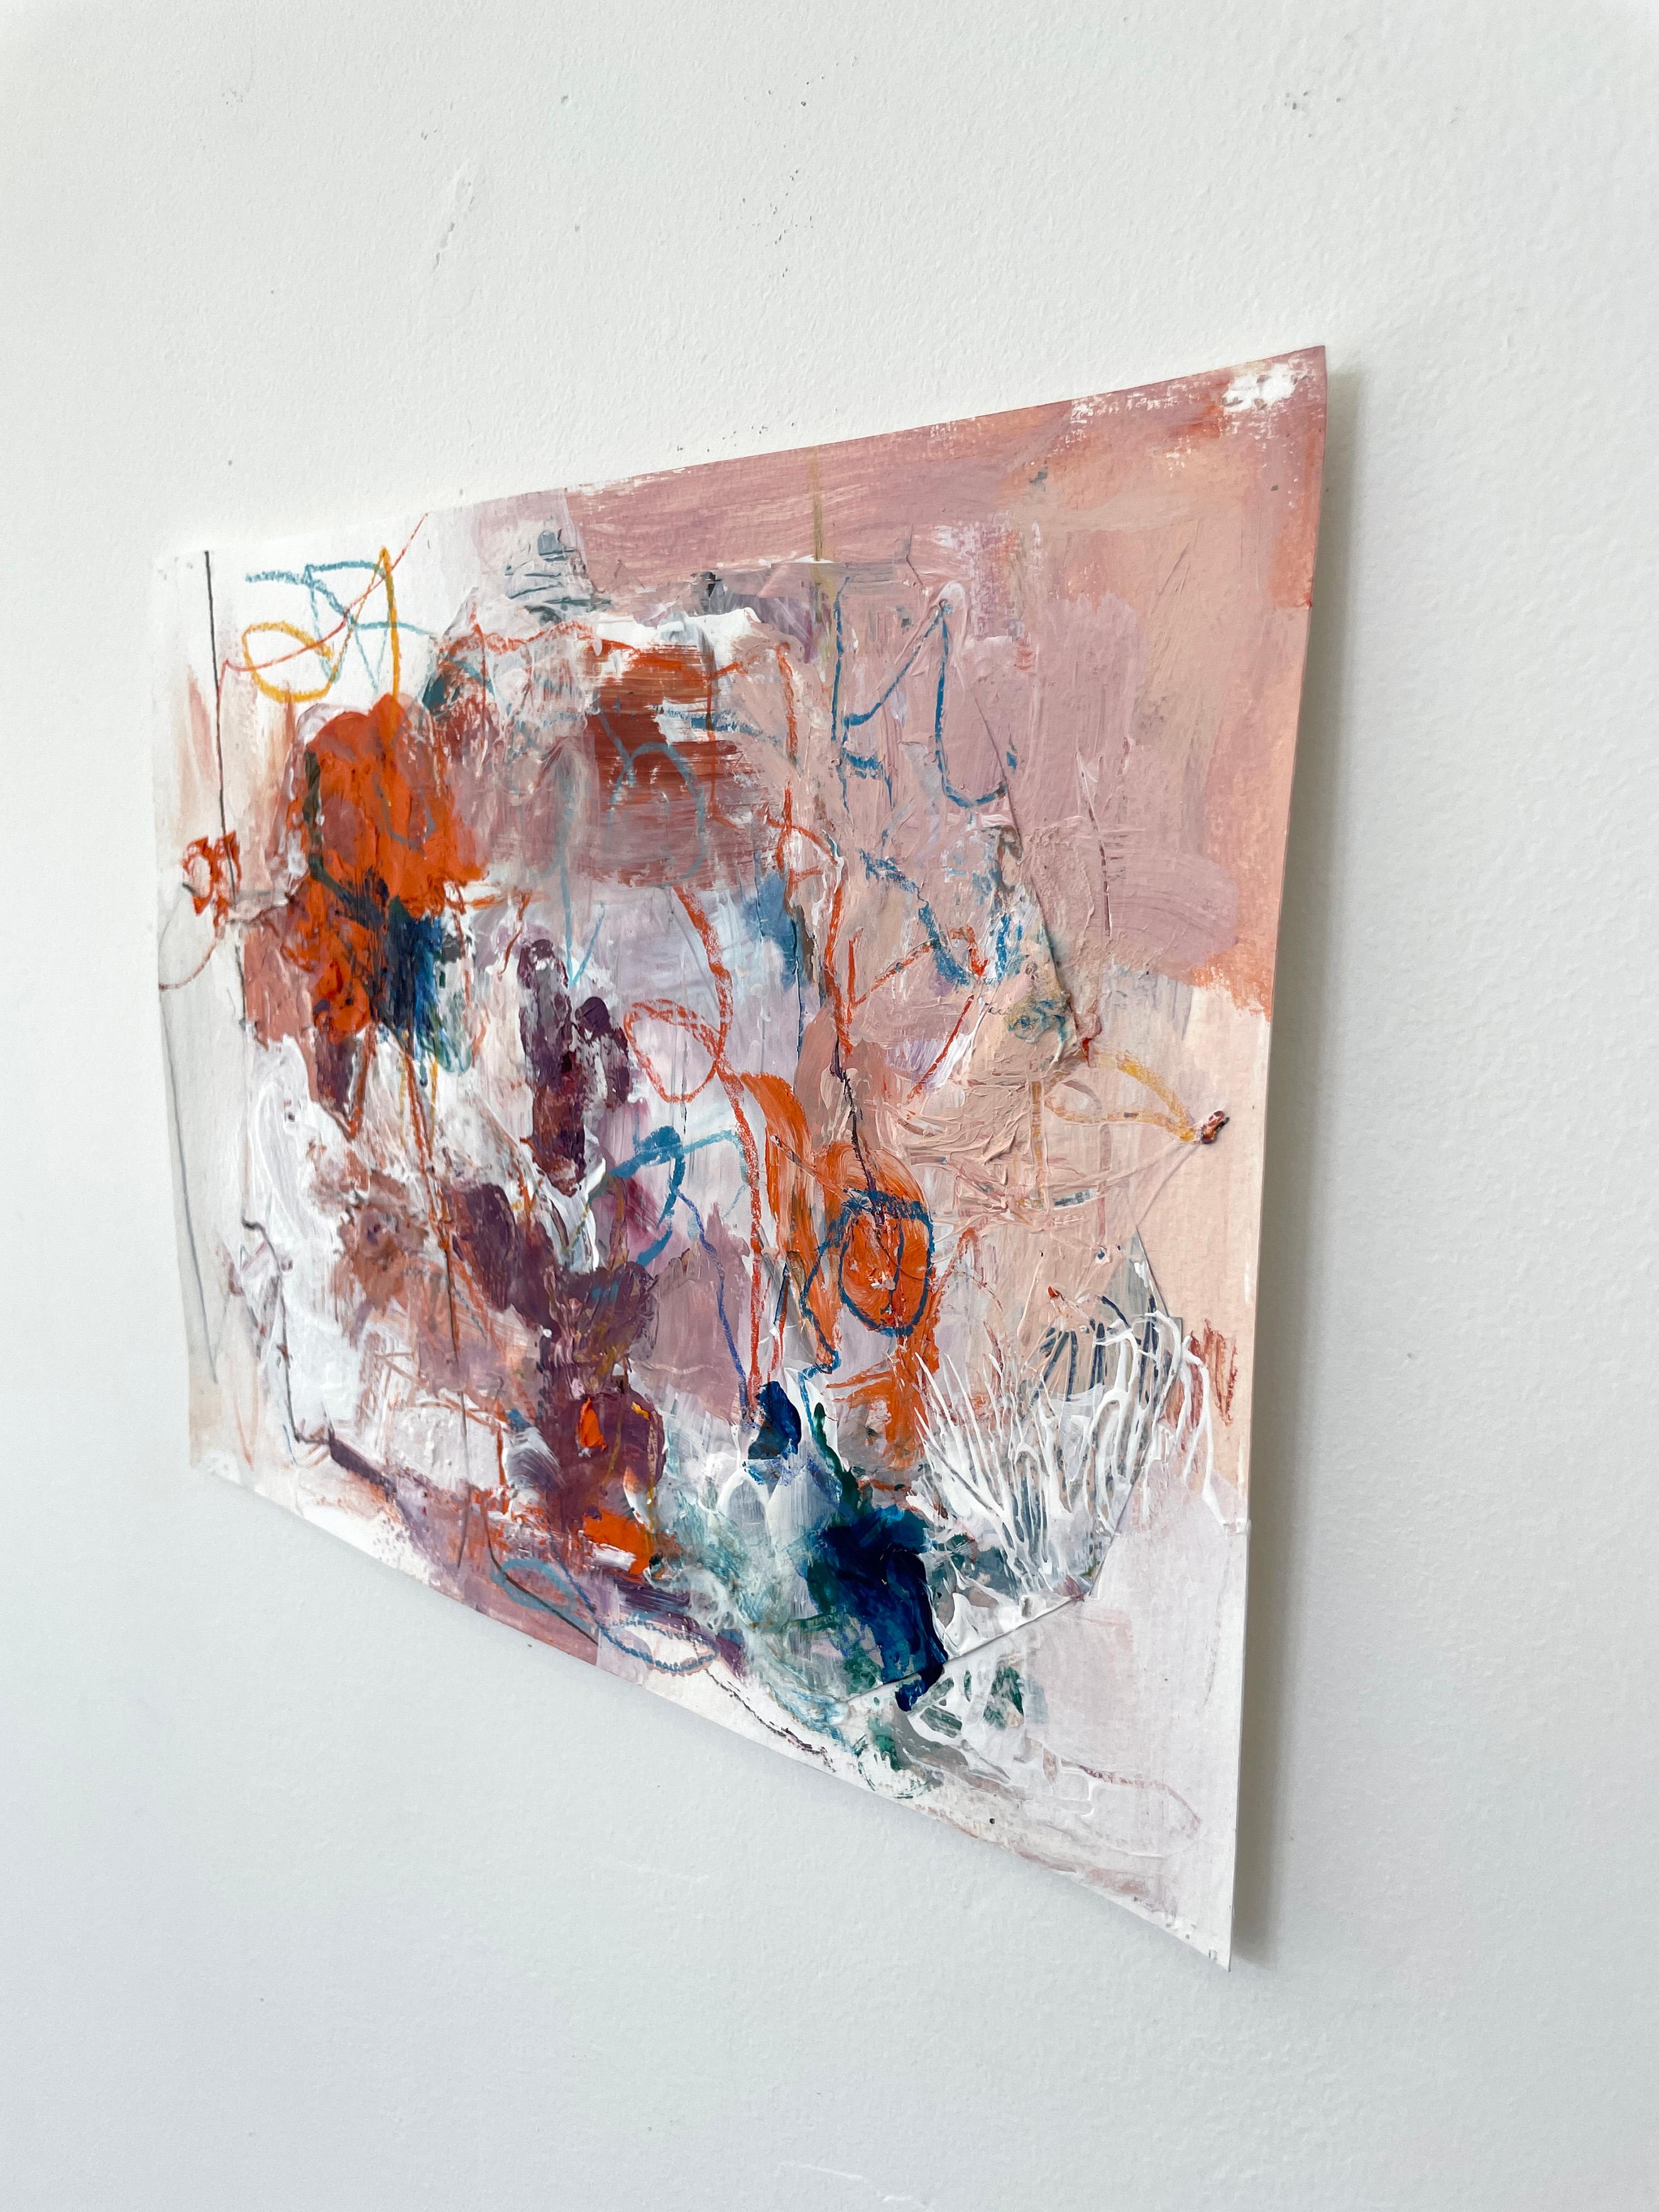 Small Works on Paper, Untitled #13 - Abstract Painting by Stephanie Visser 